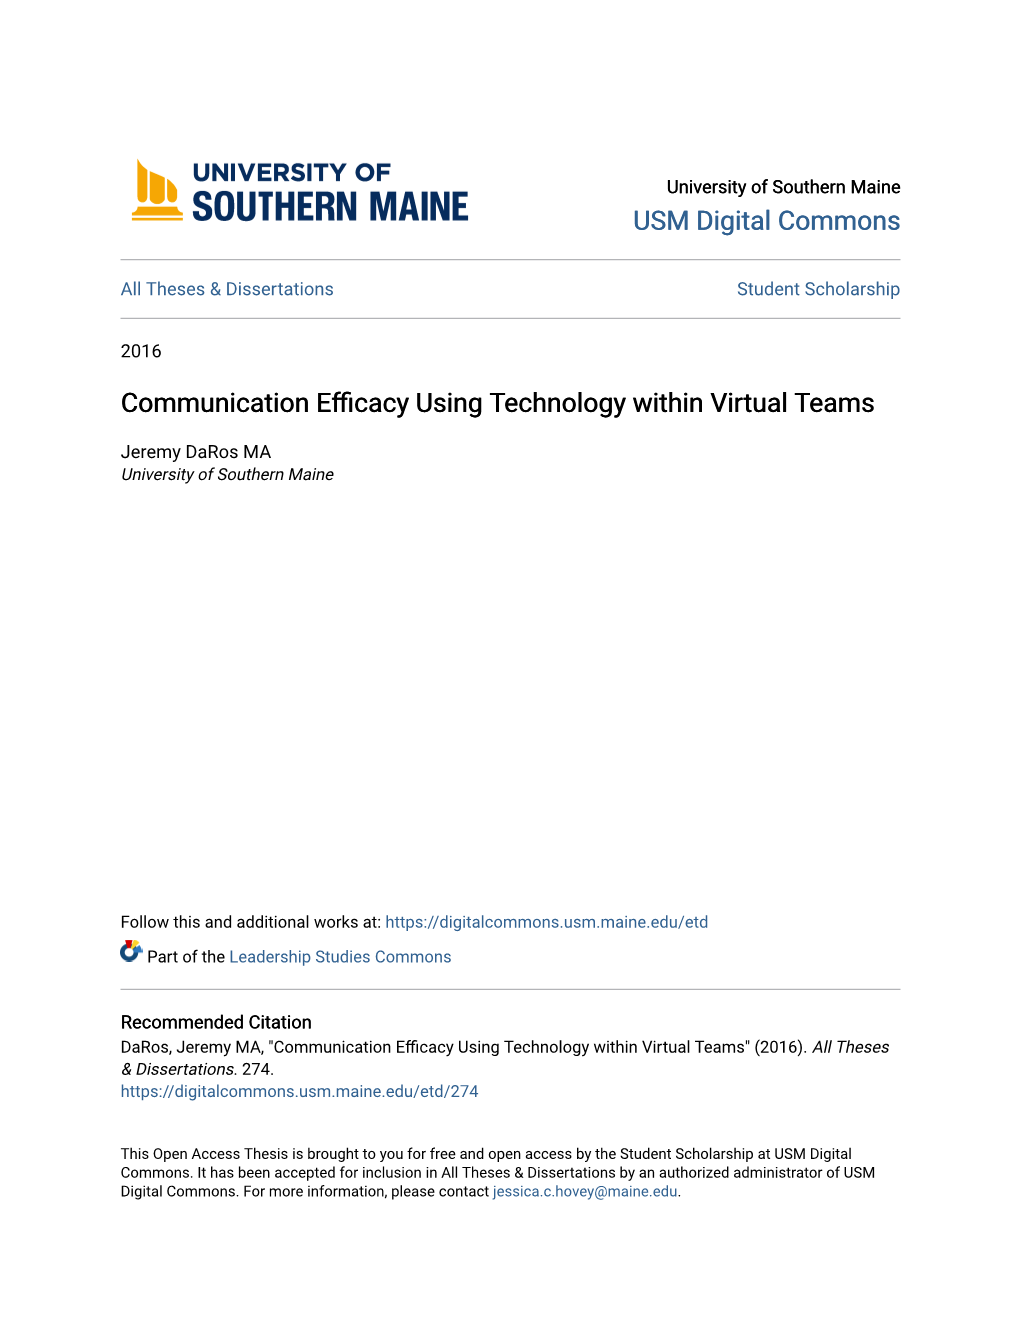 Communication Efficacy Using Technology Within Virtual Teams